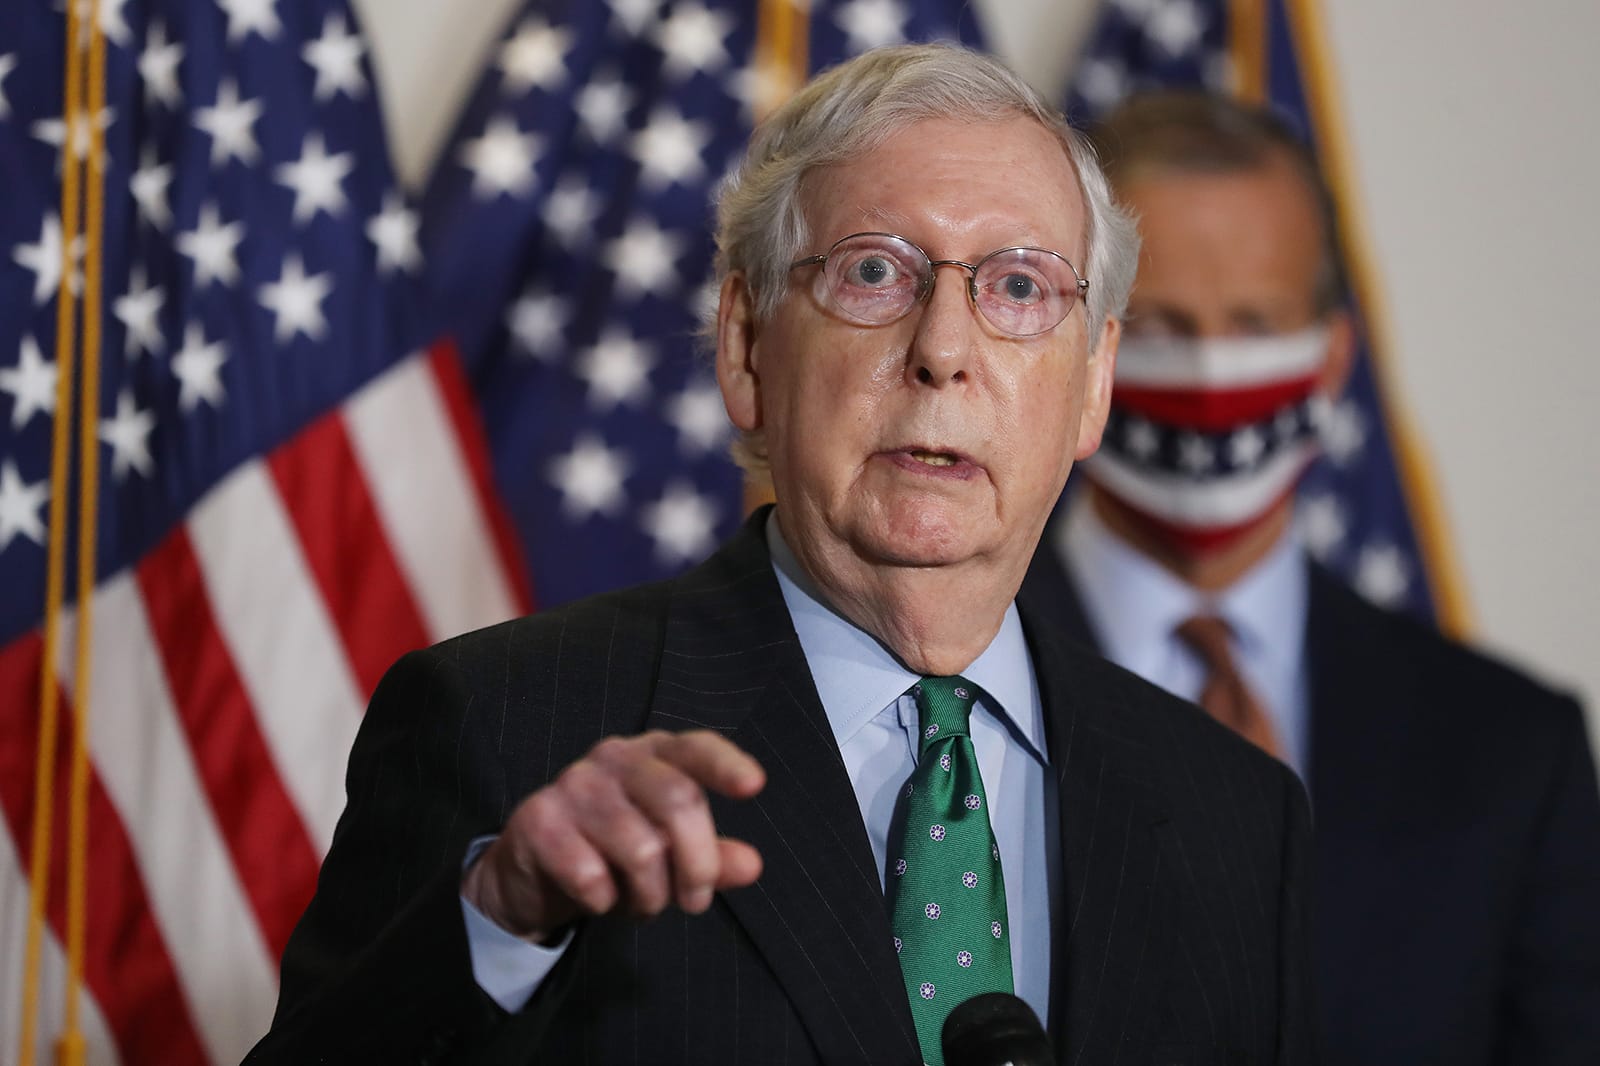 Breaking News: Mitch McConnell Throws Support Behind Trump for Presidential Bid